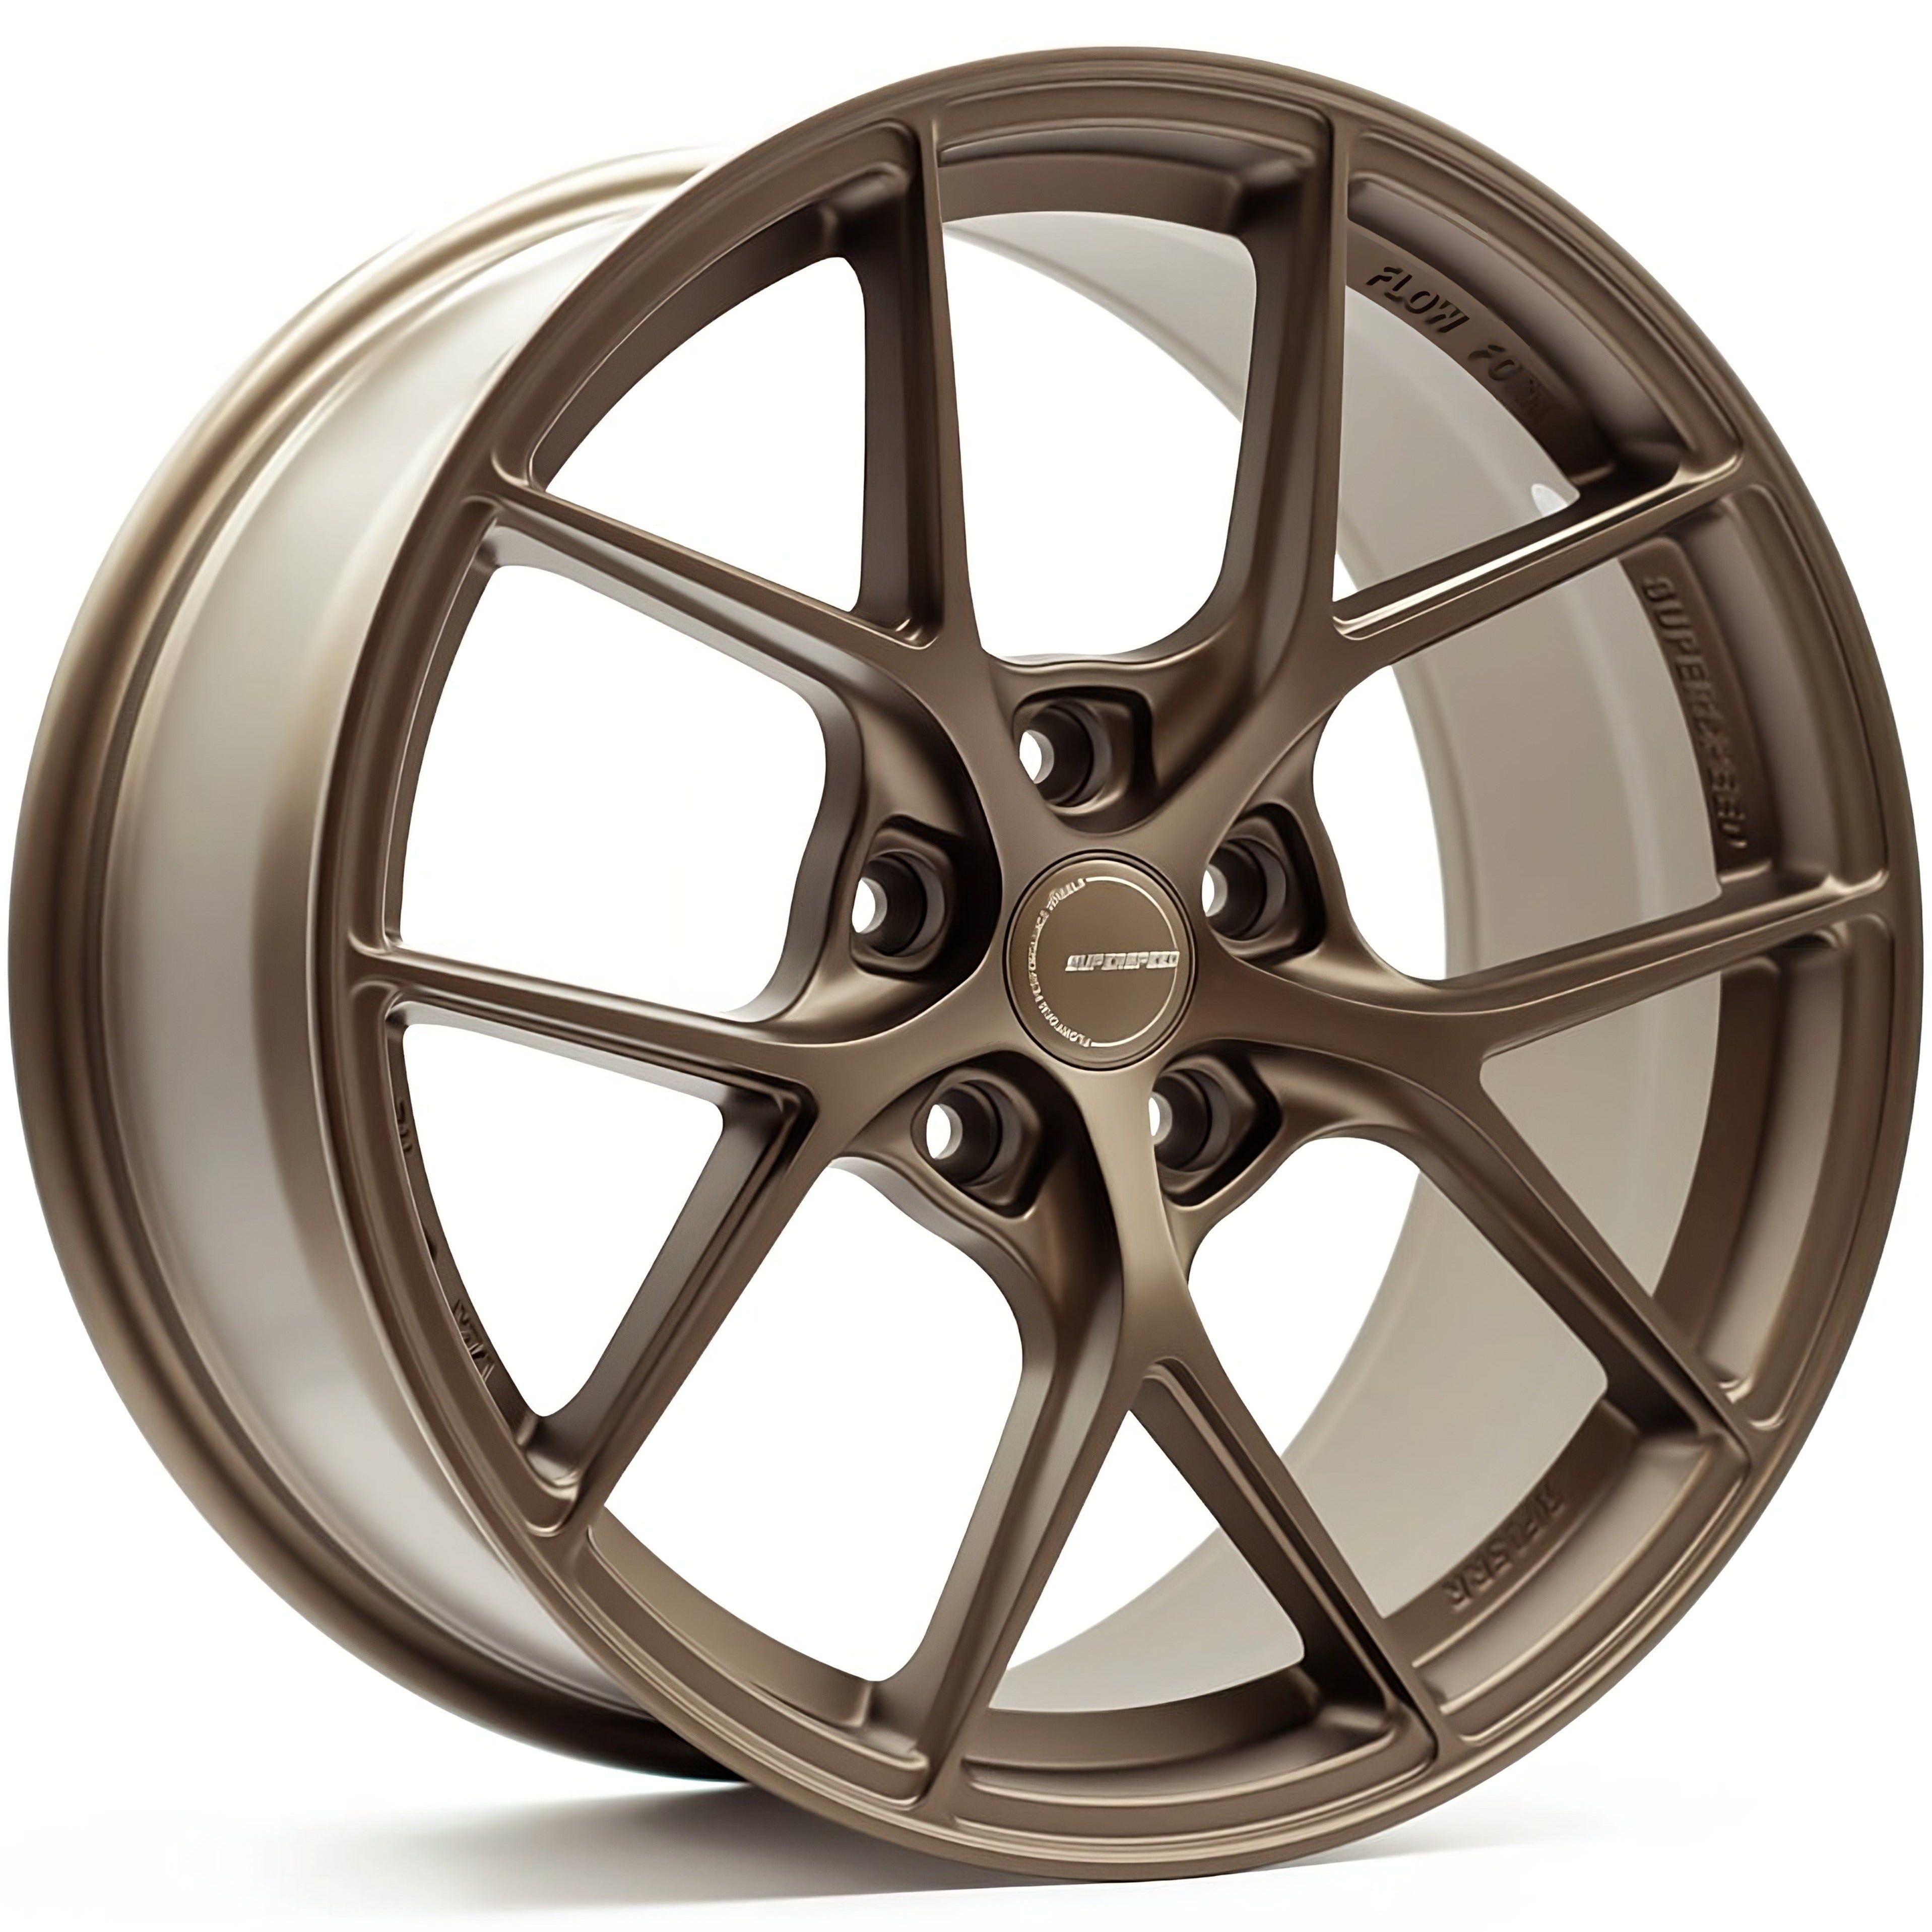 ⚡️You can find Superspeed RF05RR Satin Bronze - 20x9.5